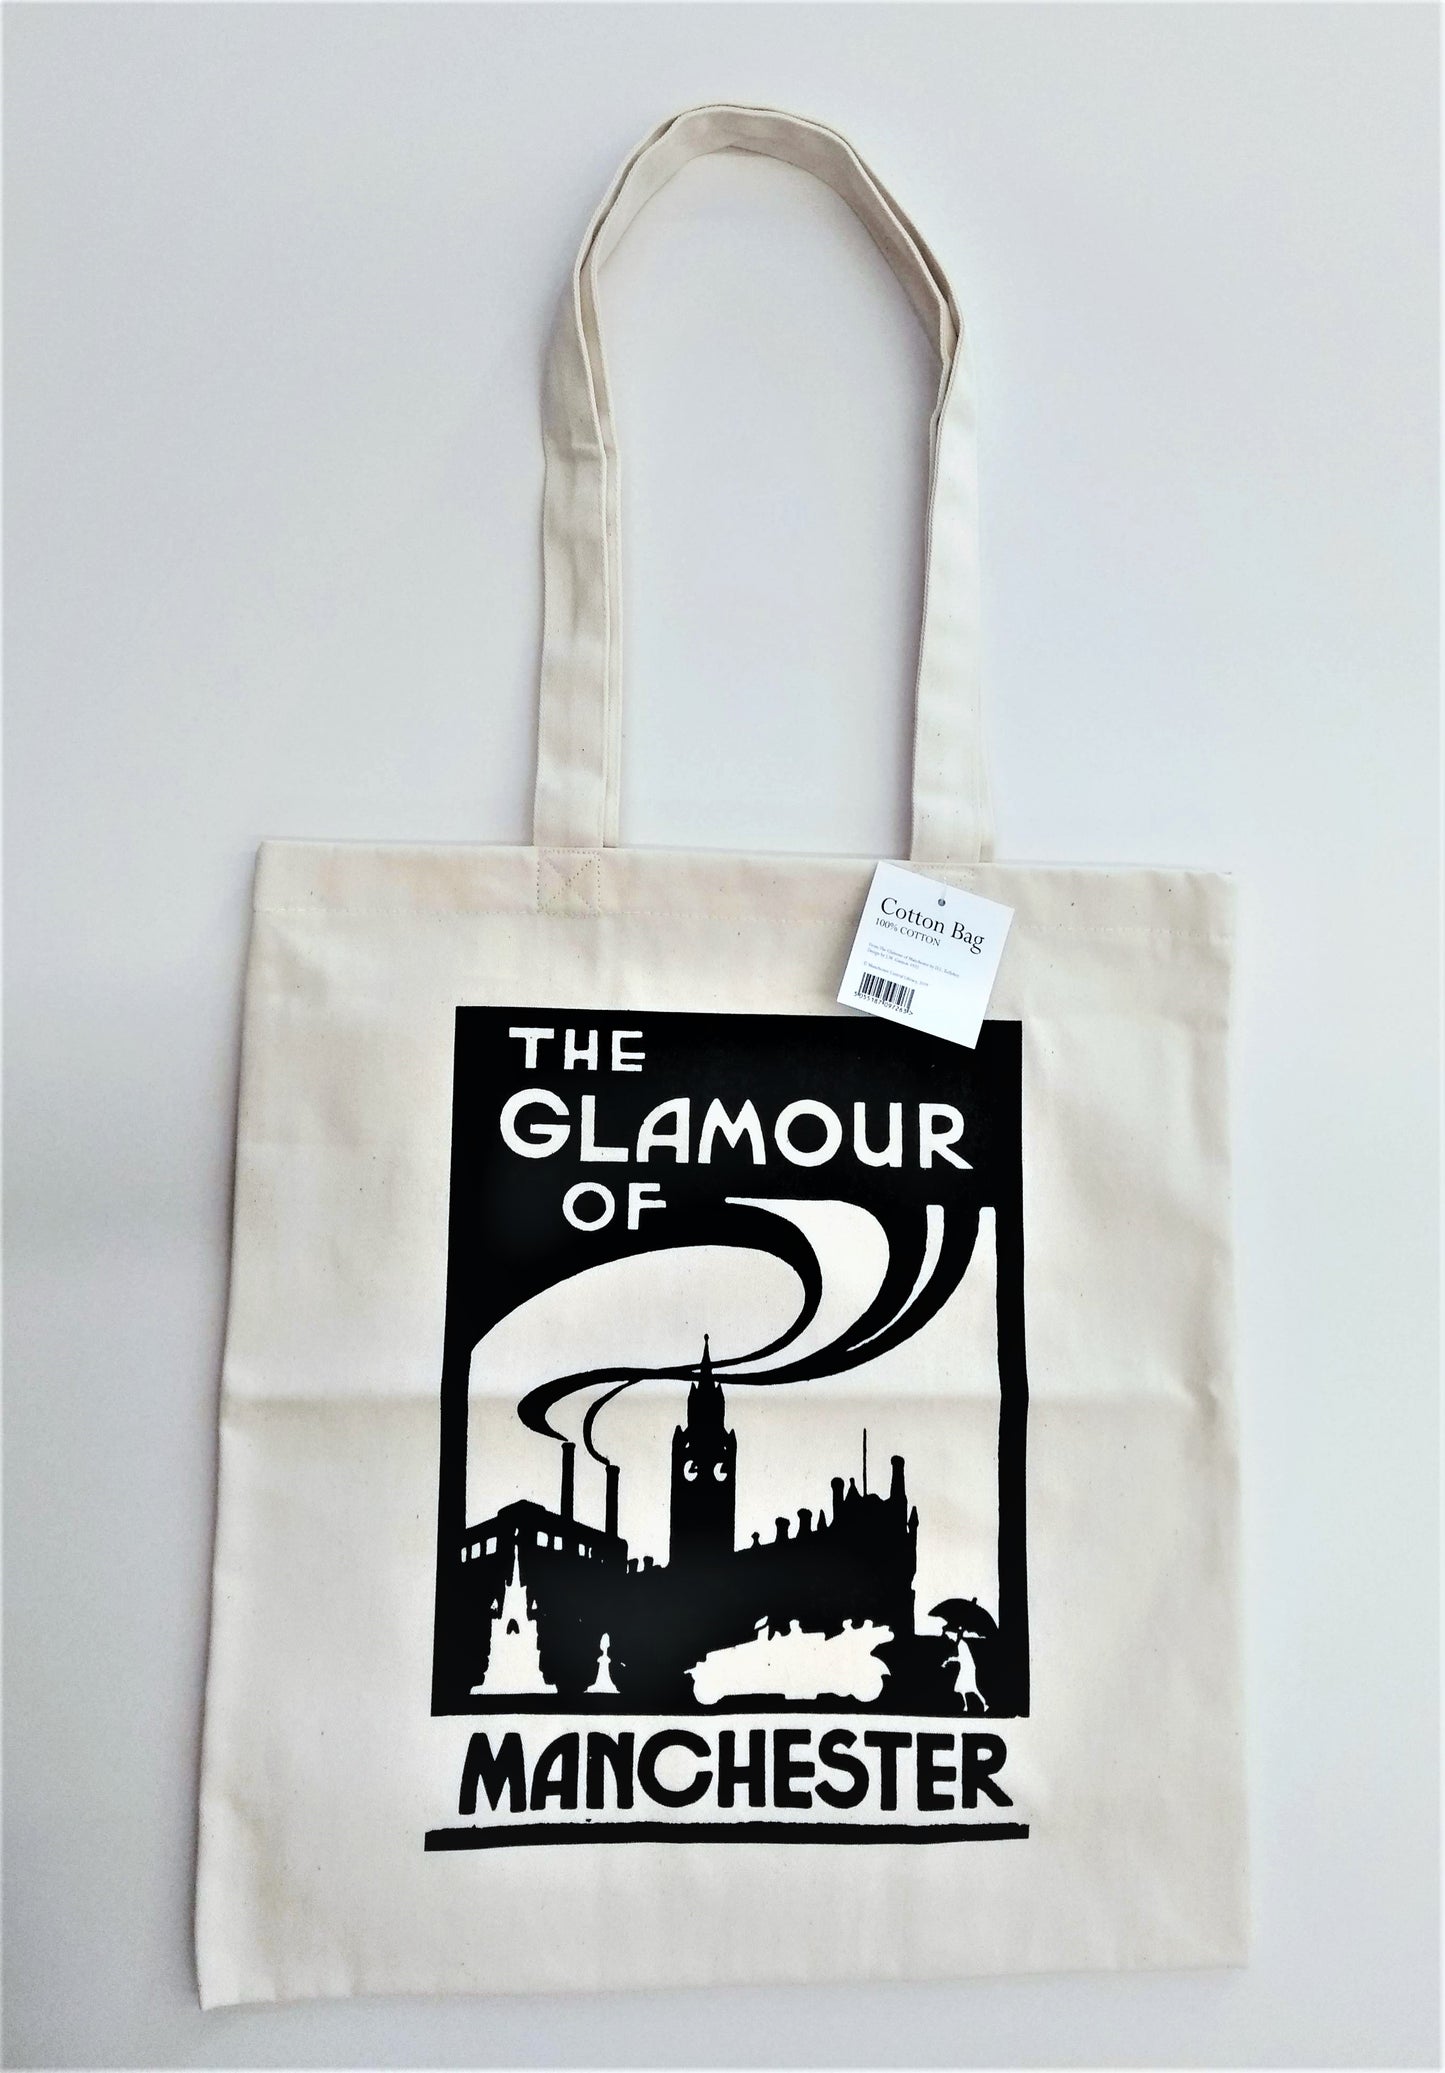 Cotton tote bag featuring - The Glamour of Manchester image. It was taken from the book by the Irish poet  D.L Kelleher, design by J.M Gannon (1920)